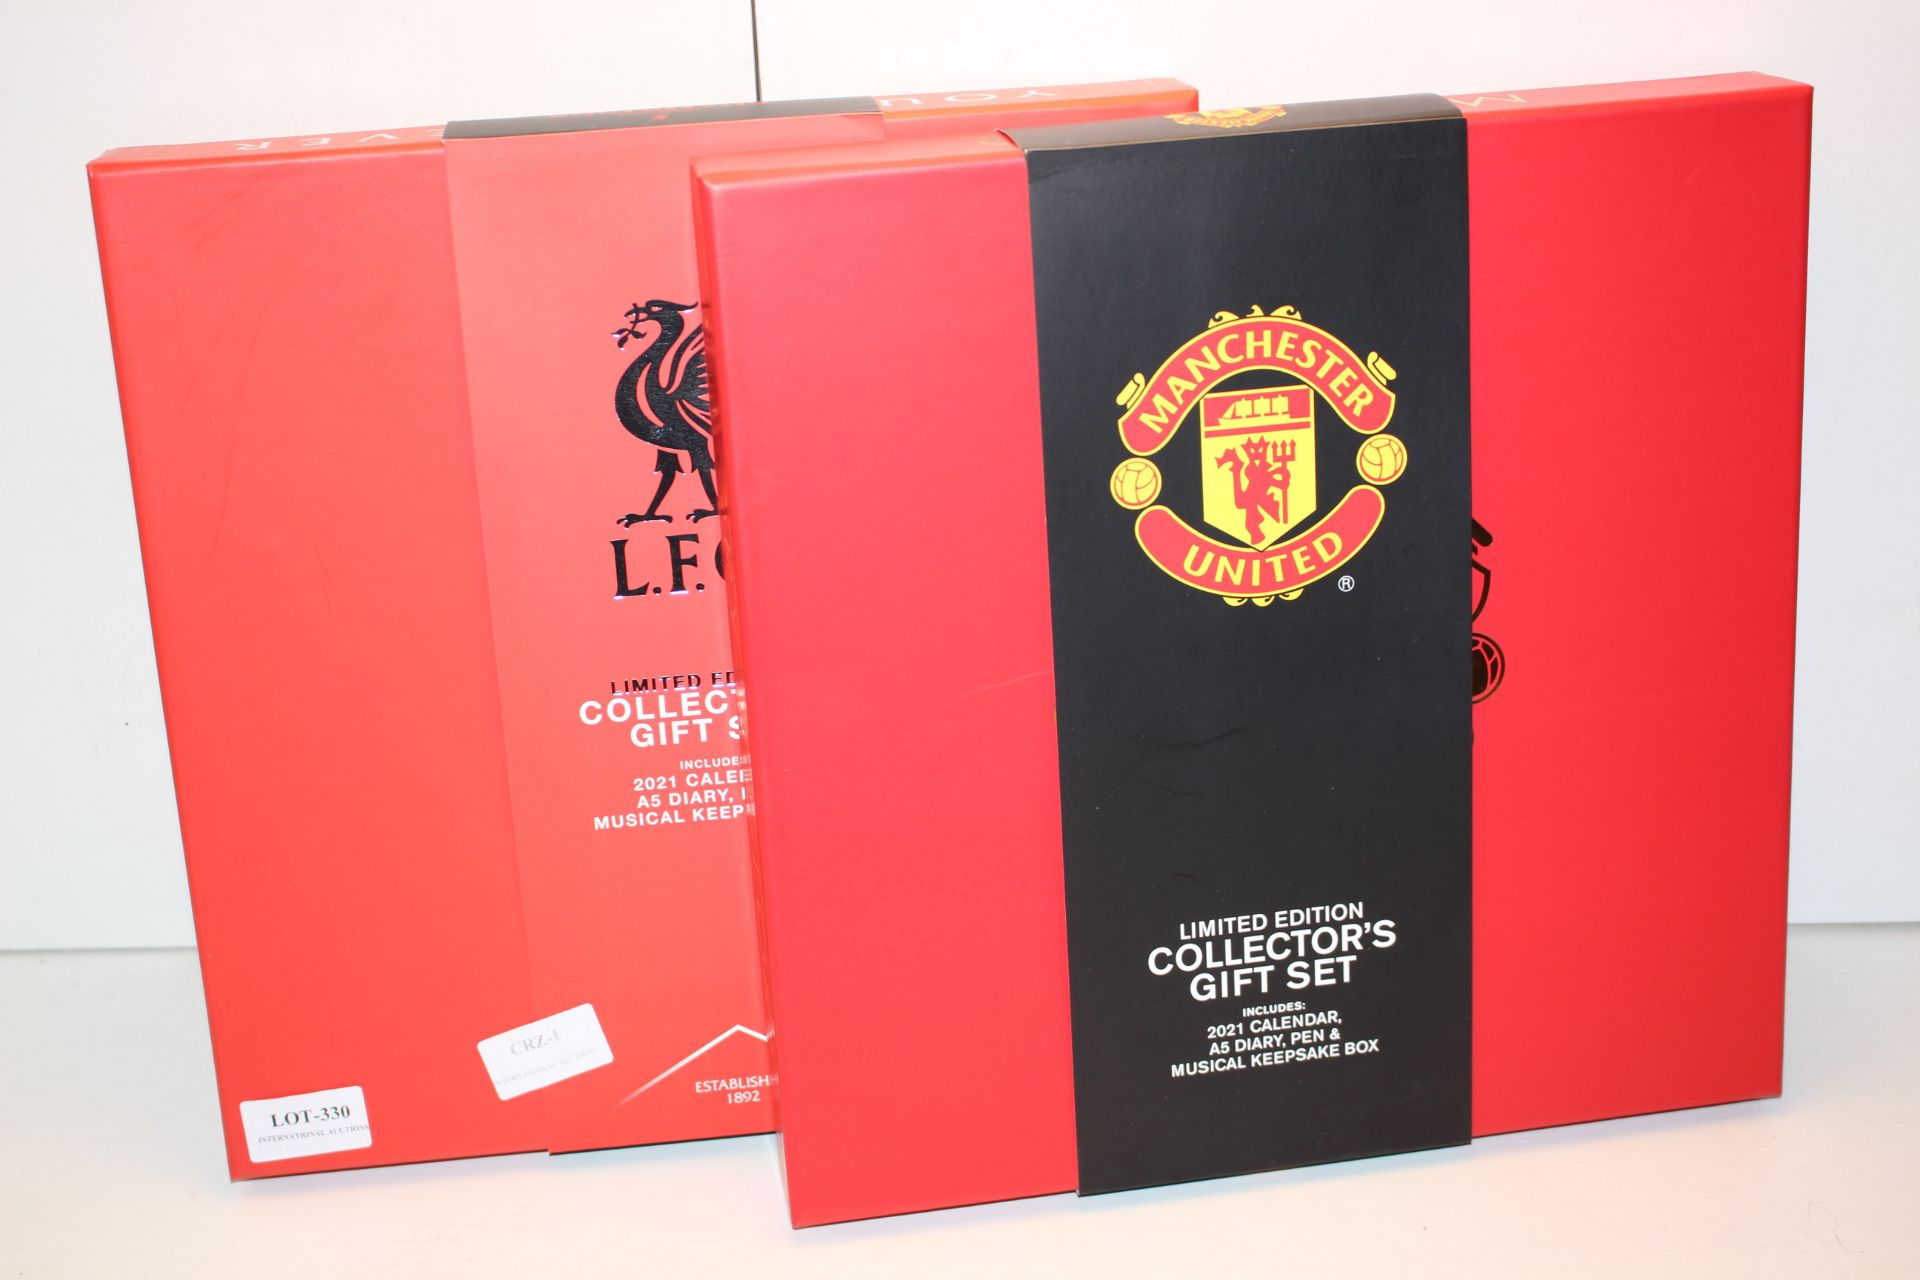 2X BOXED PREMIER LEAGUE CHAMPIONS L.F.C LIMITED EDITION COLLECTOR'S GIFT SET & MANCHESTER UNITED